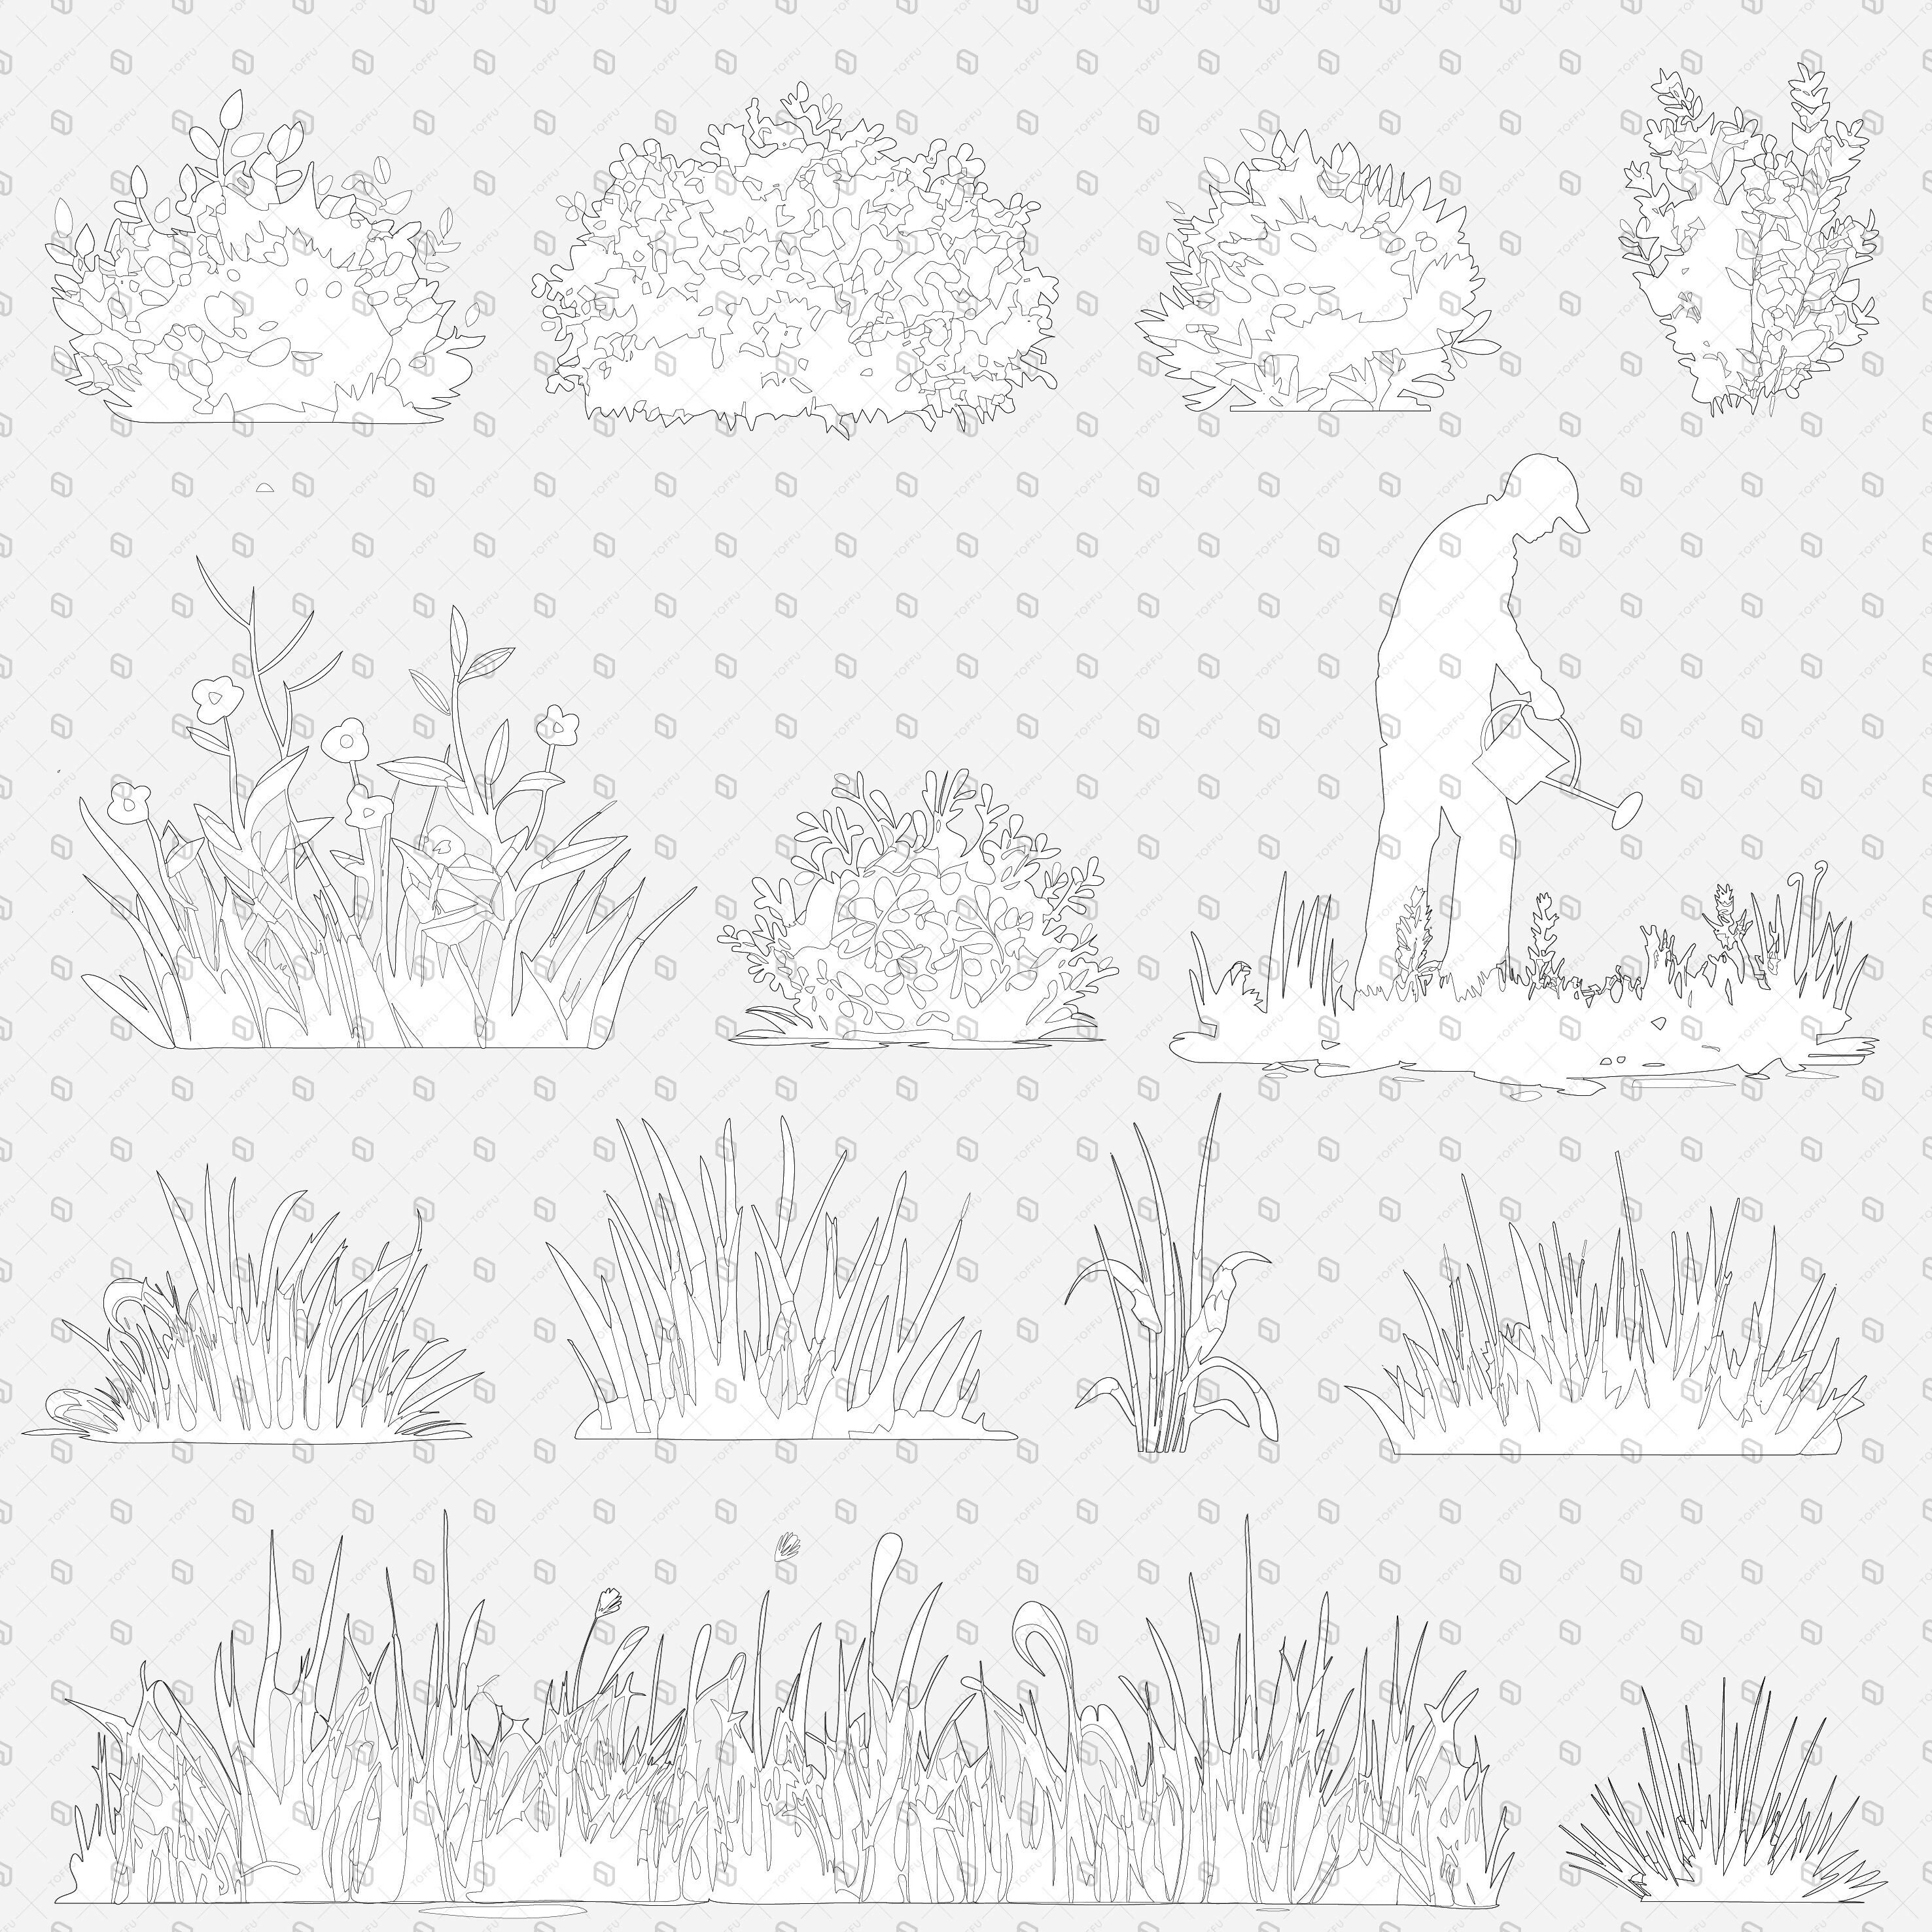 Cad Vegetation Plants and Grass 2 PNG - Toffu Co